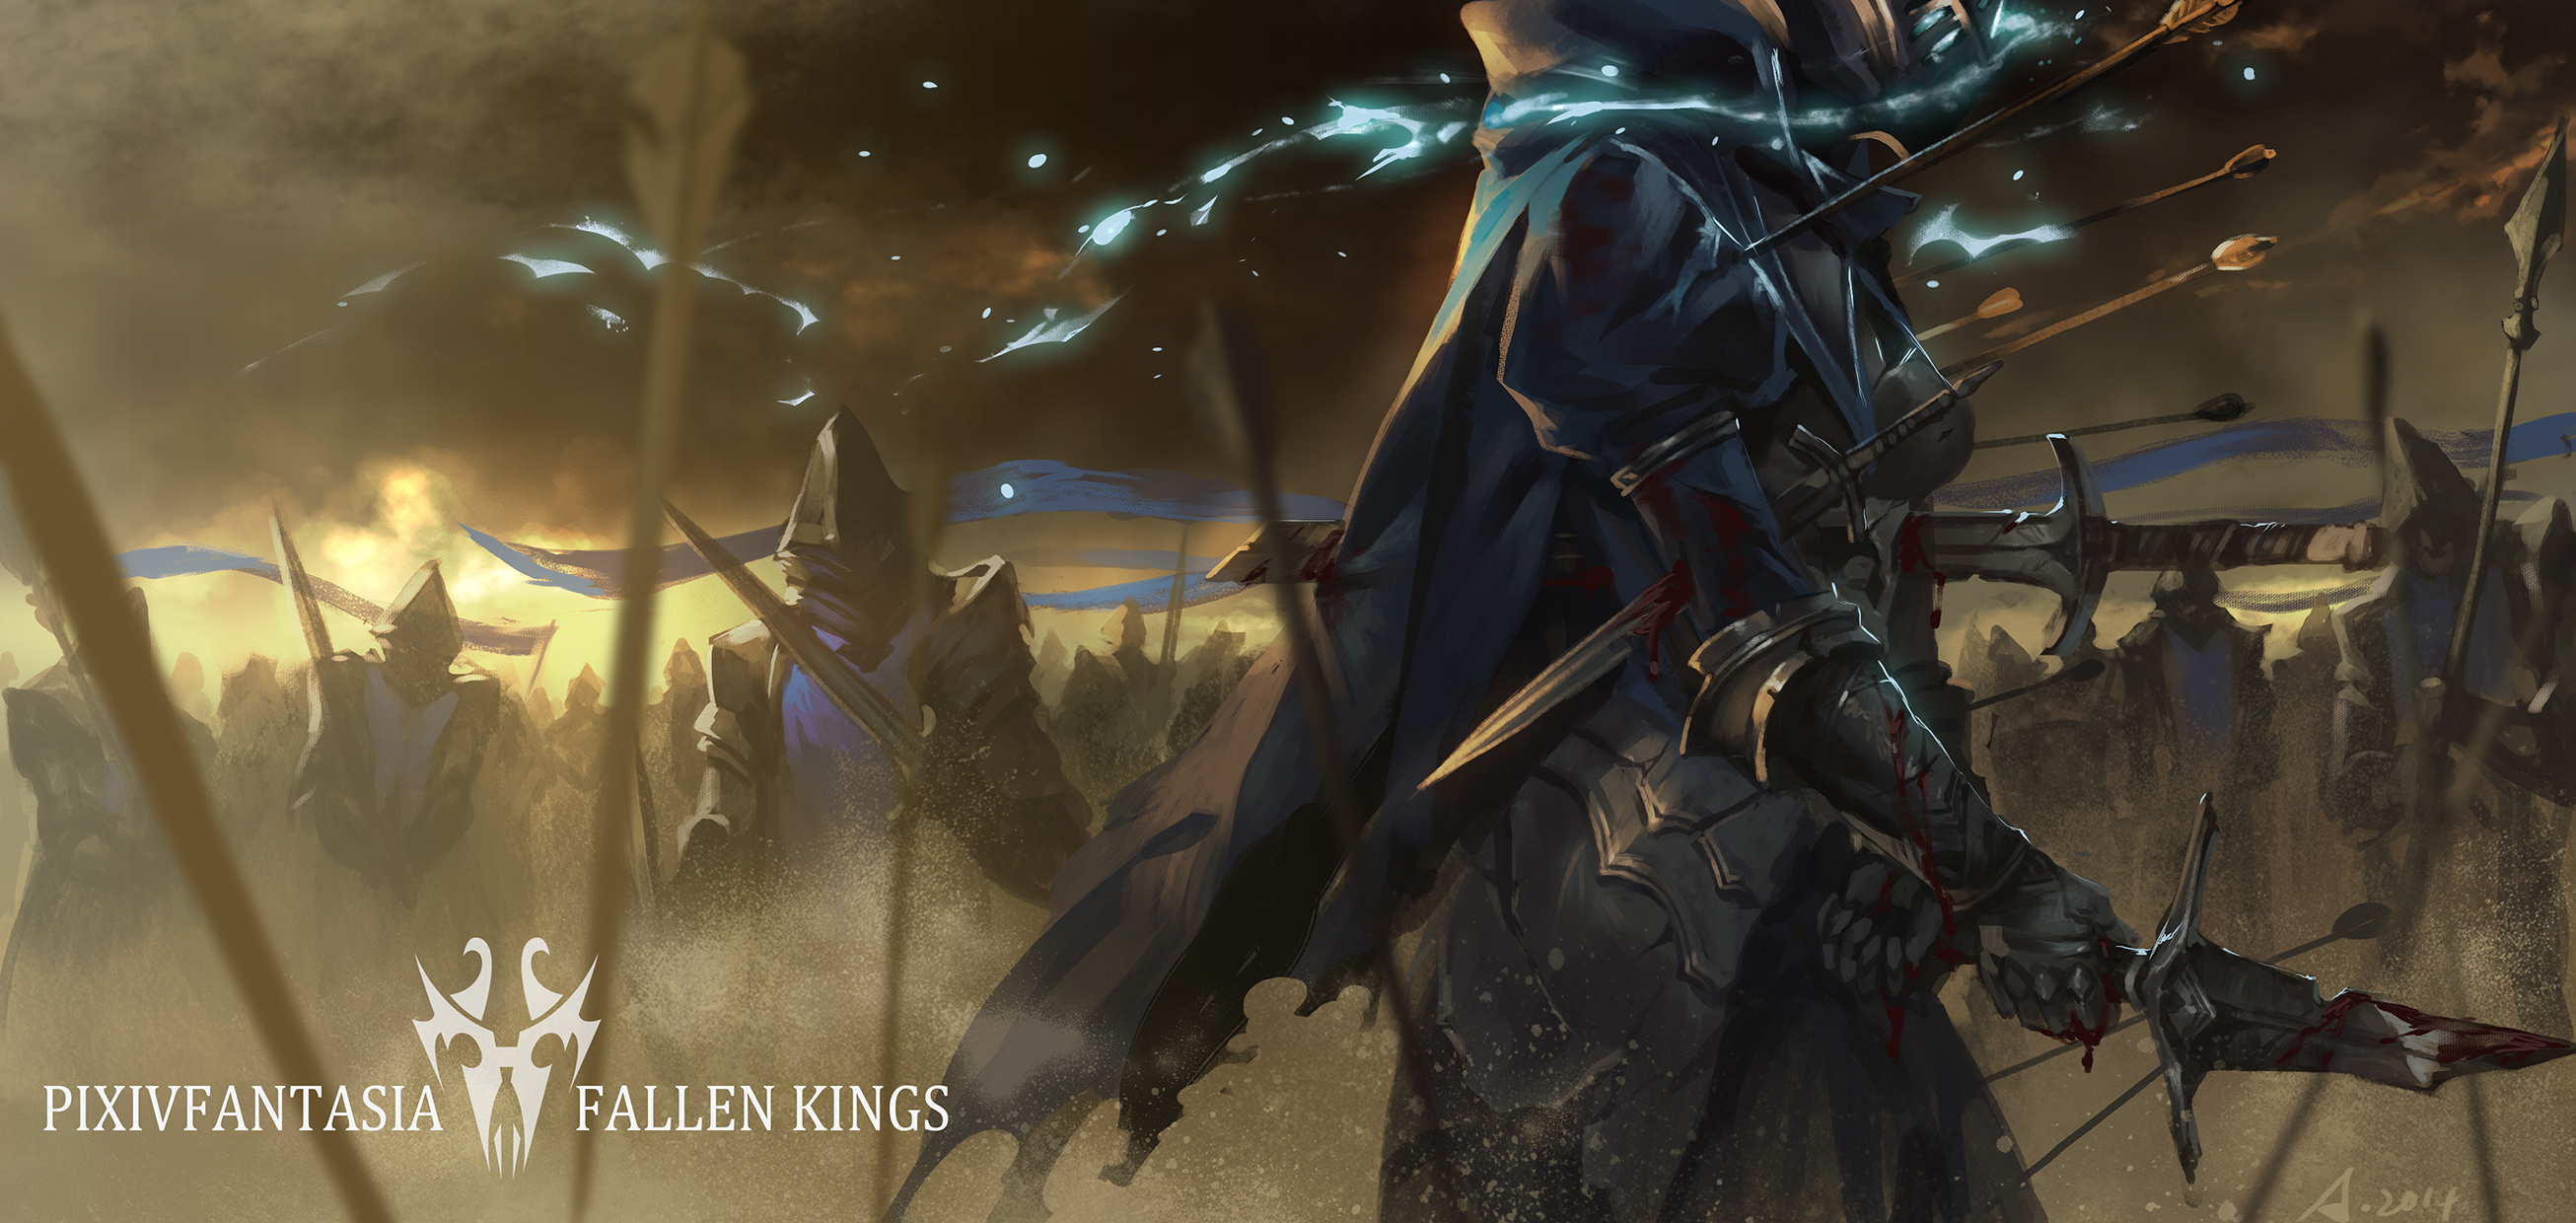 Pixiv Fantasia Fallen Kings Wallpapers, Pictures, Images